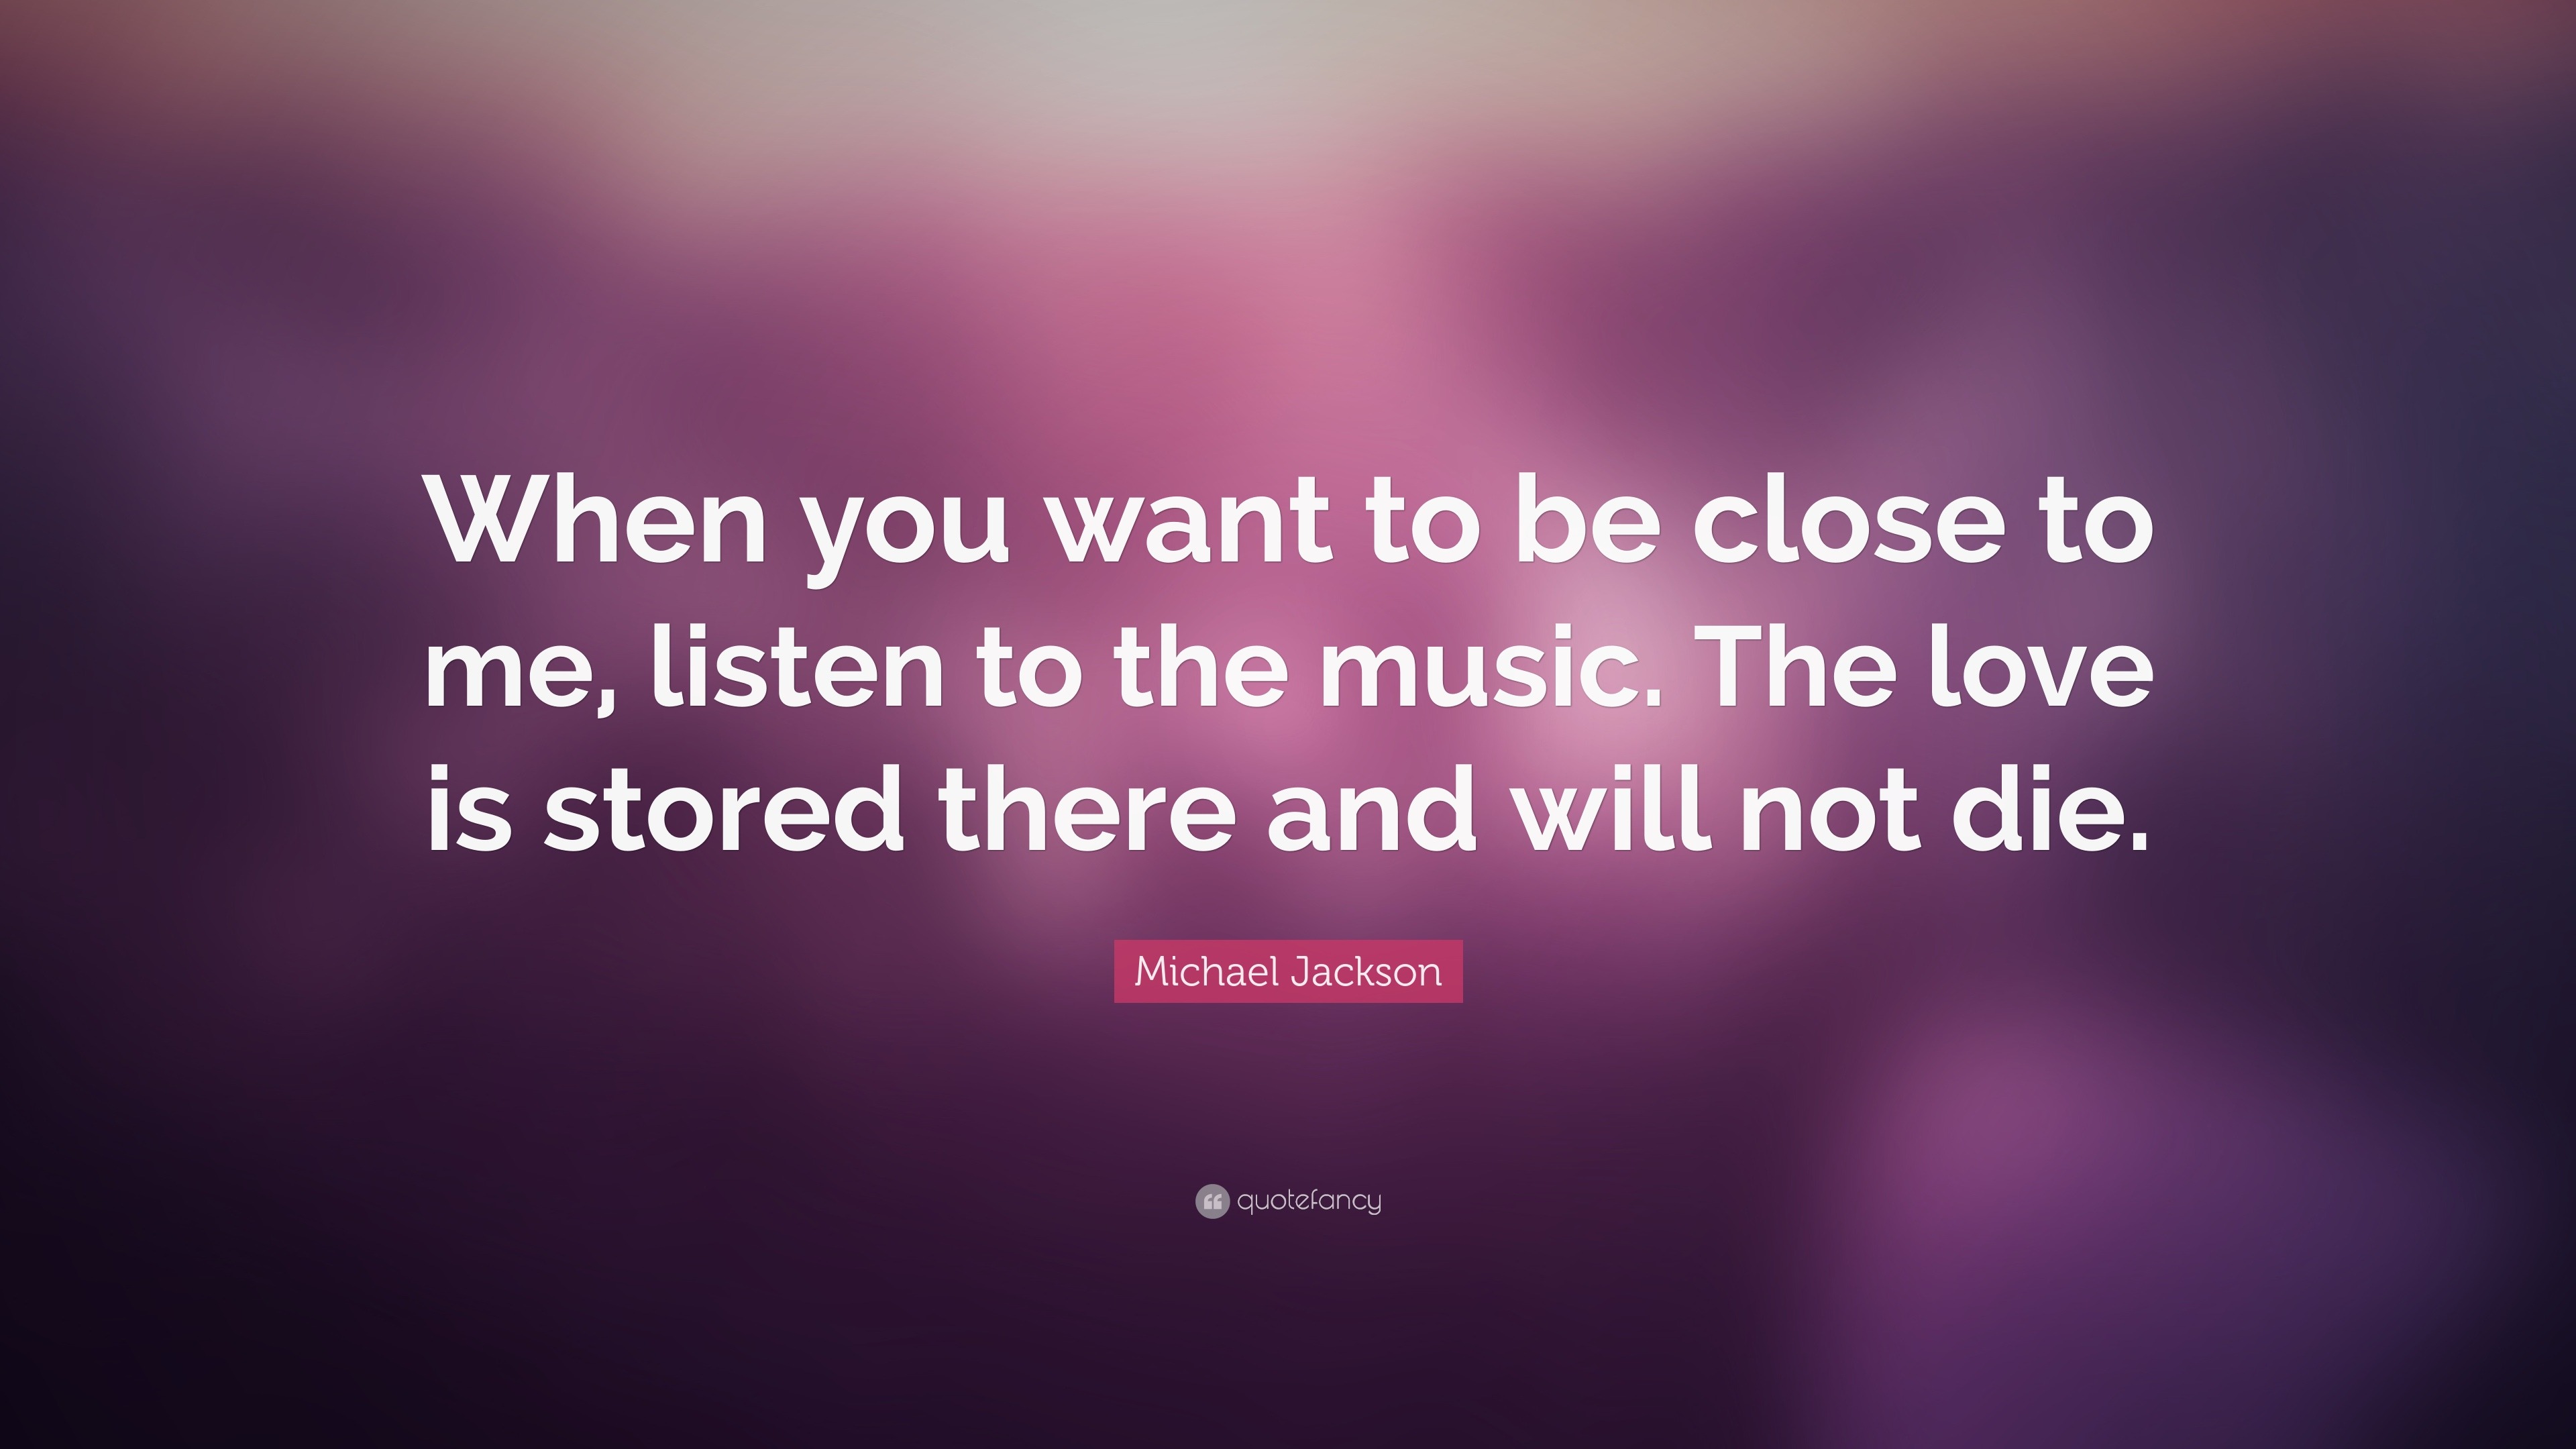 Michael Jackson Quote: “When you want to be close to me, listen to the  music. The